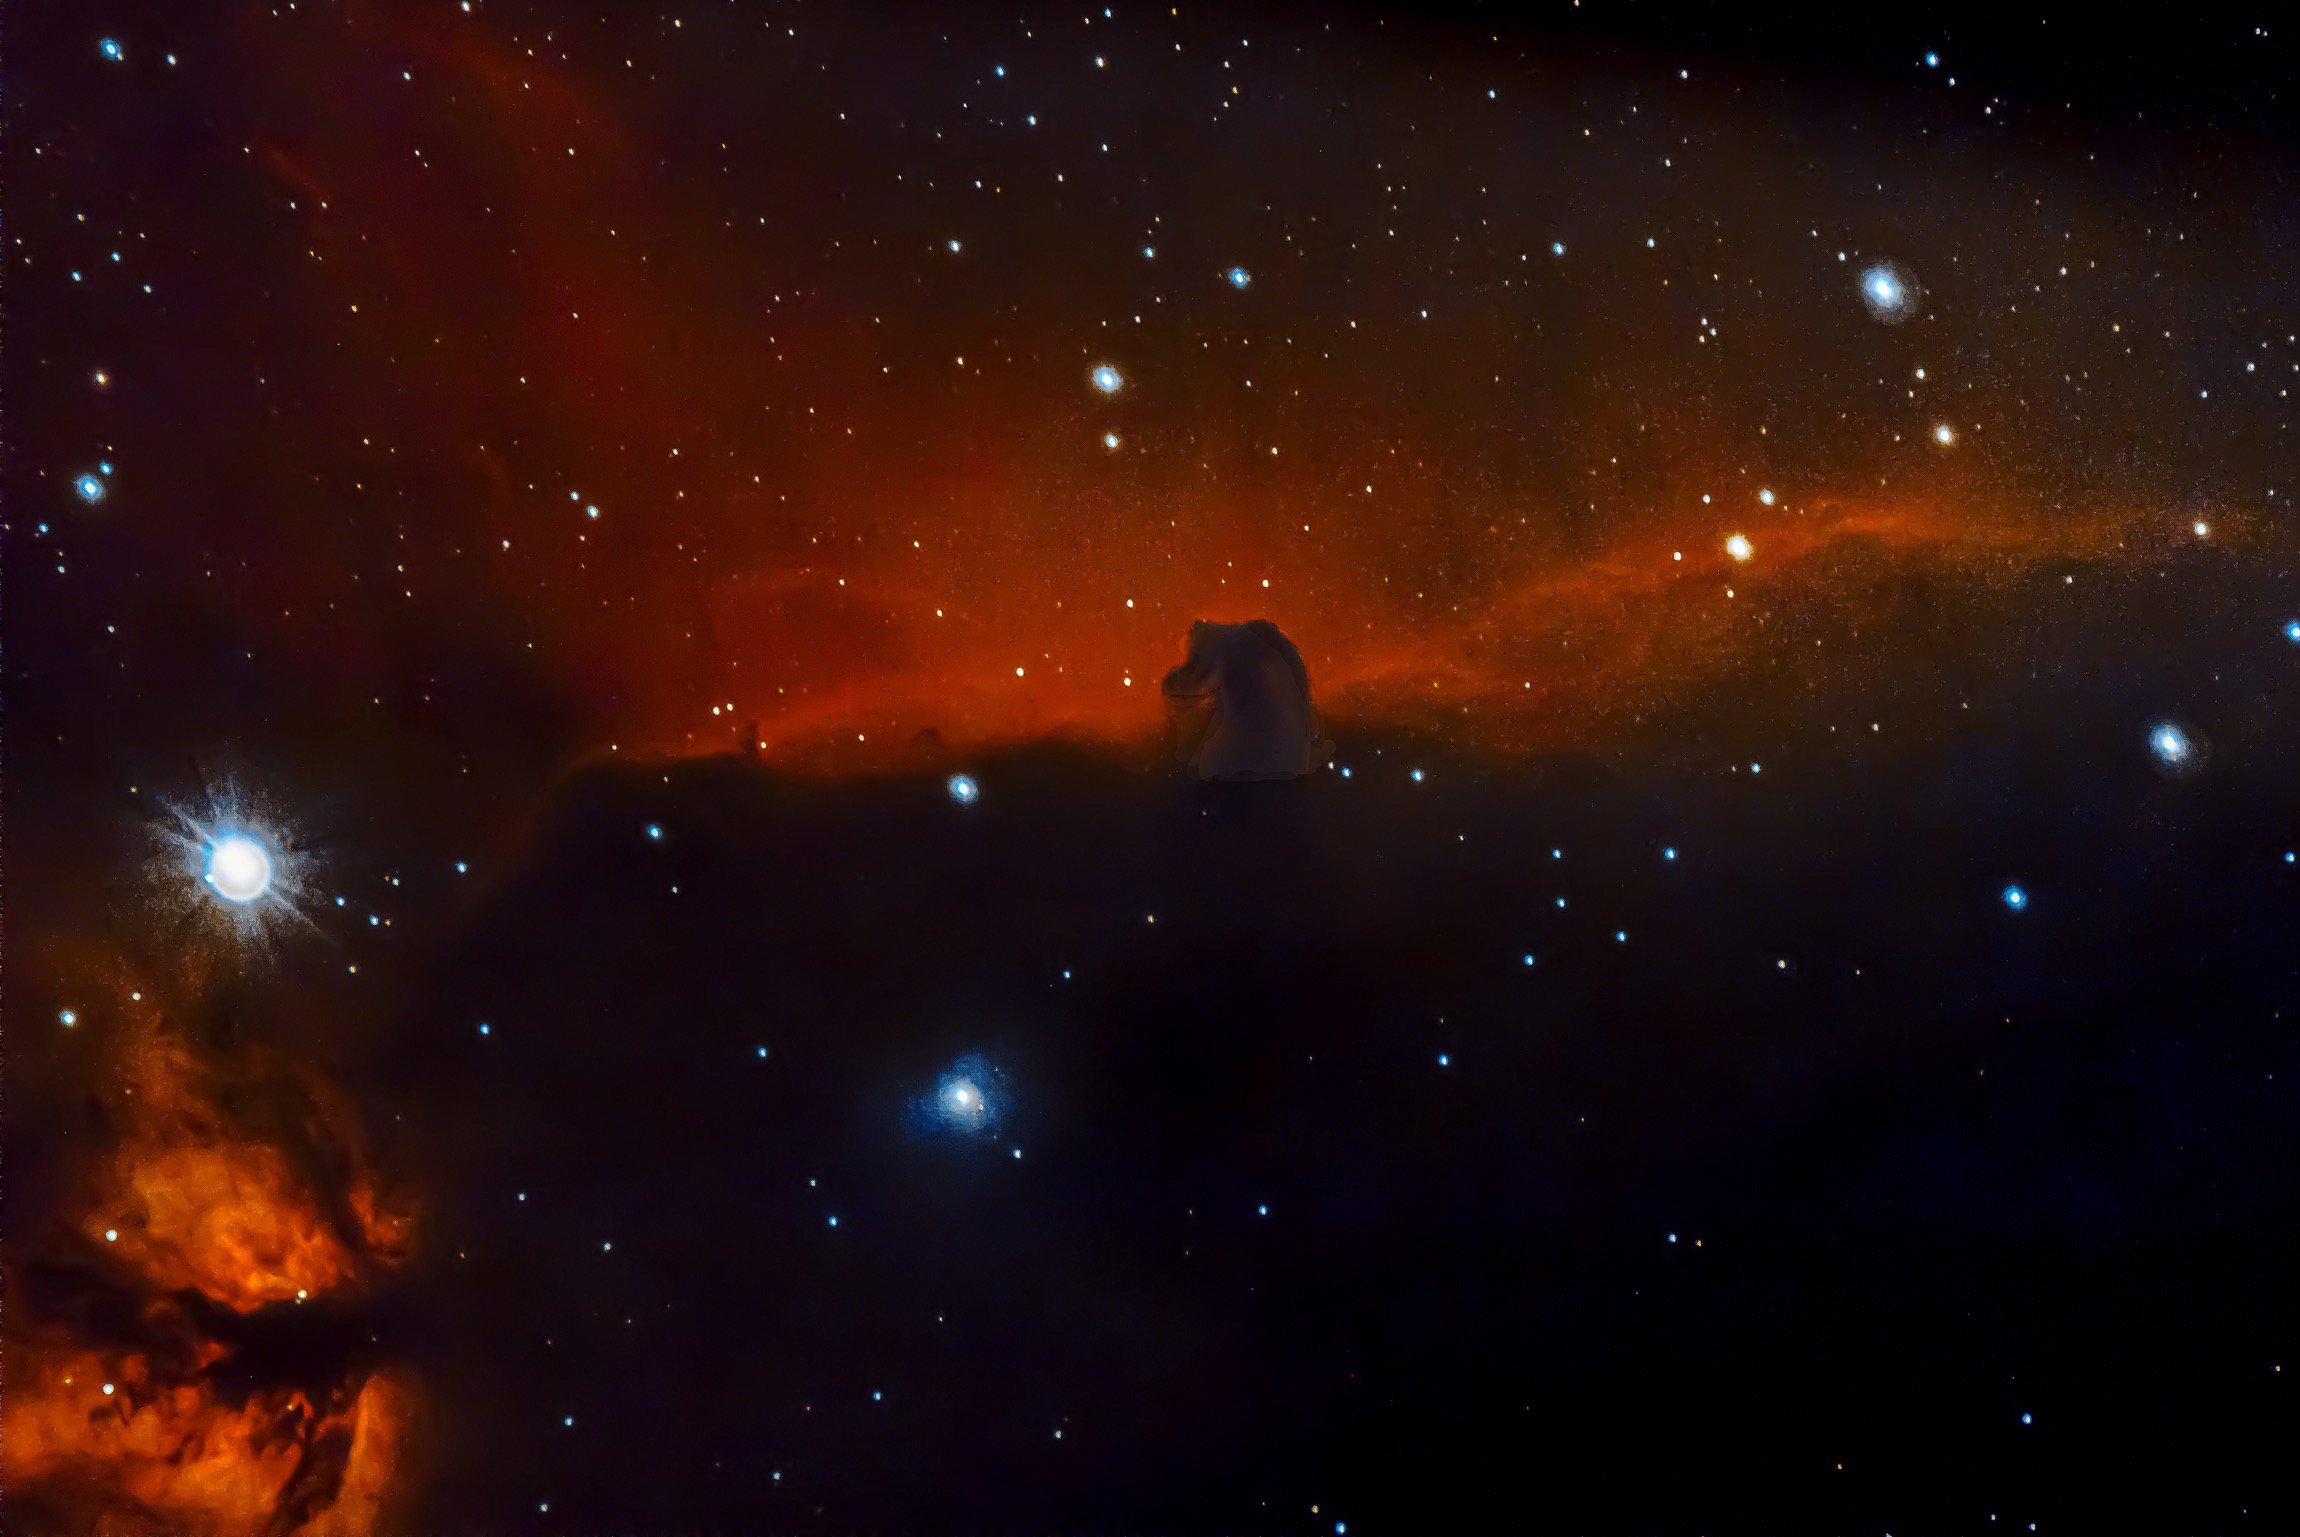 “Horsehead and flame Nebulae”, about 1400 light years away. First imaged at Harvard College Observatory in 1888.The magnetic fields channel the gases leaving the nebula into streams shown as foreground streaks against the background glow.Bright spots in the Horsehead nebula’s base are young stars.Flame nebula is a cluster of newly formed stars.